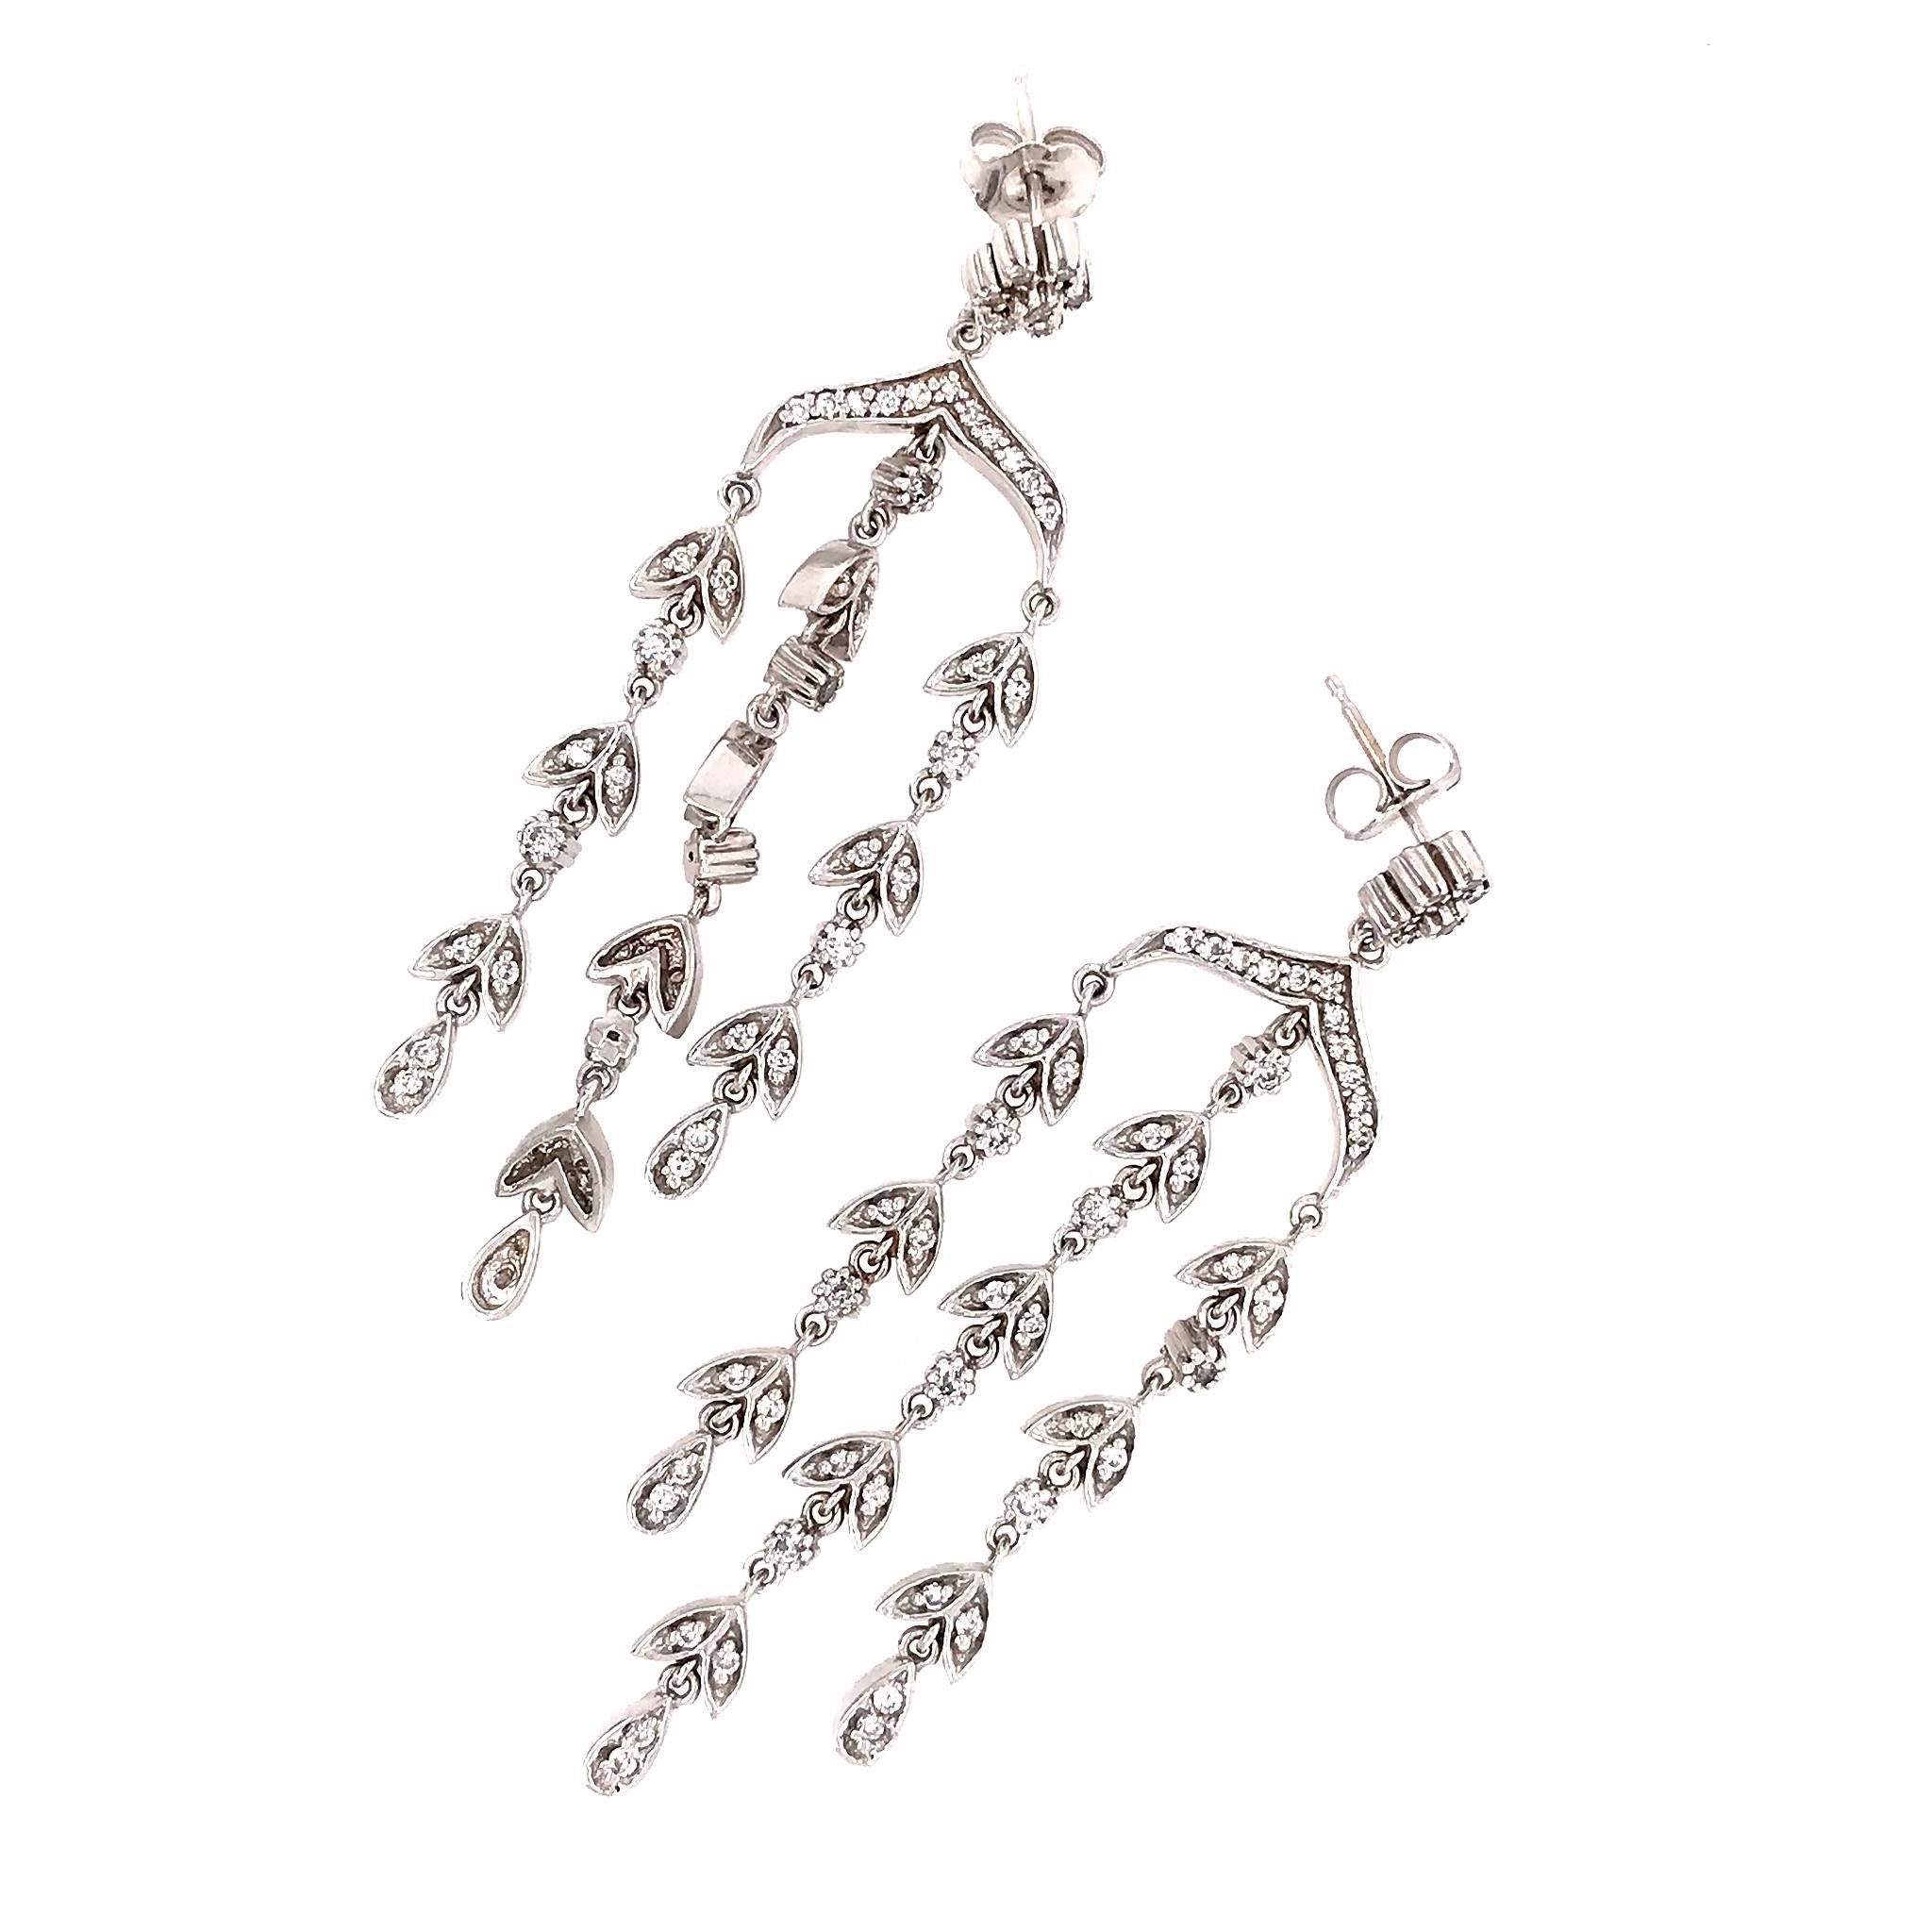 14k White Gold
Diamond: 1.00 ct twd (estimated)
Earrings Length: 2 inches